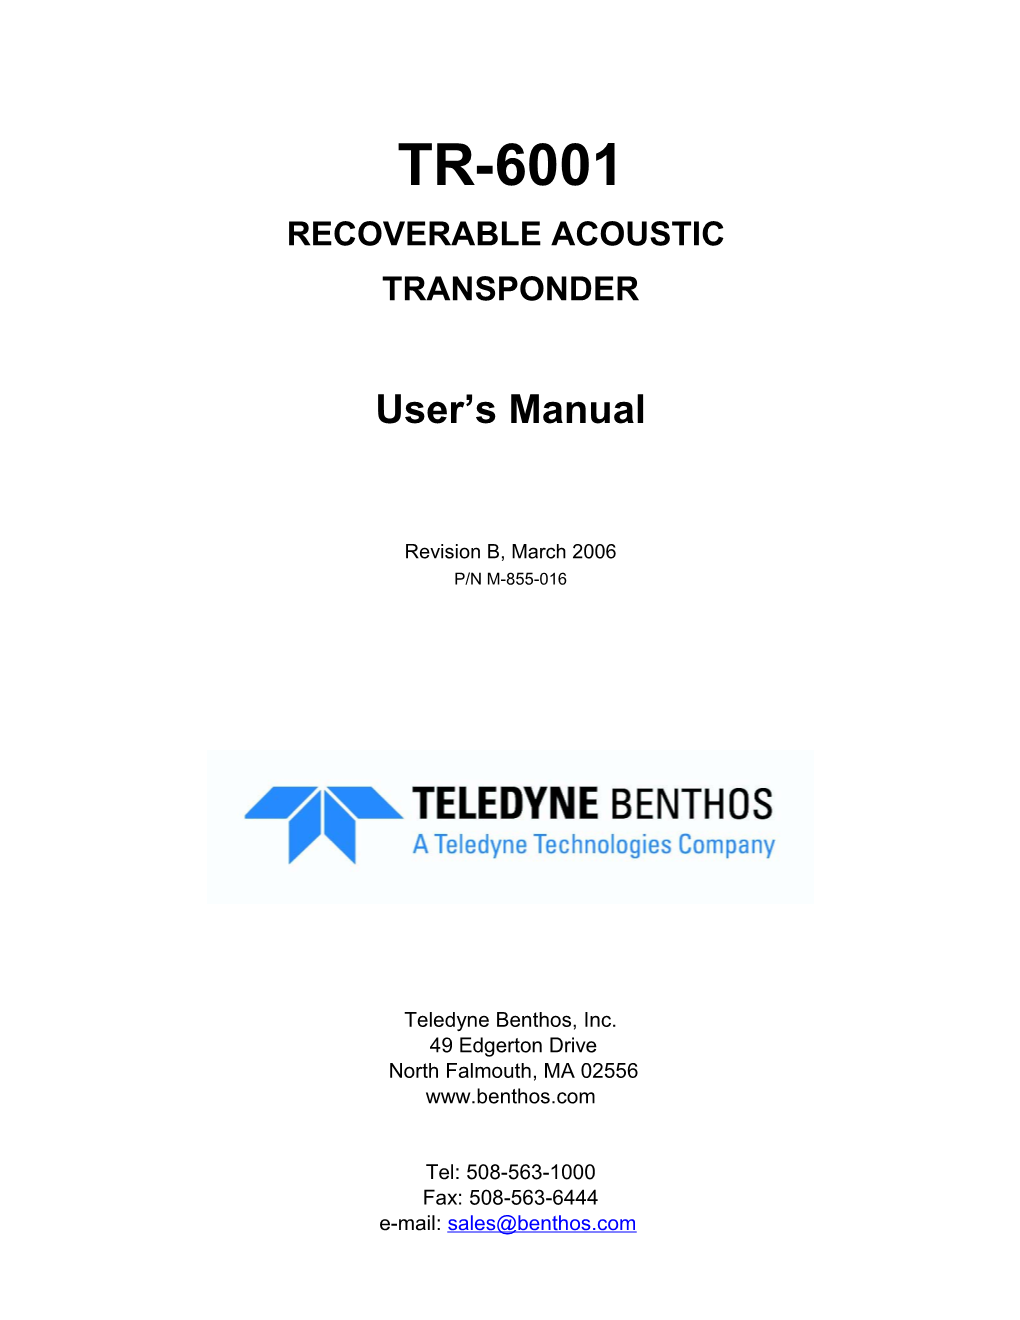 Recoverable Acoustic